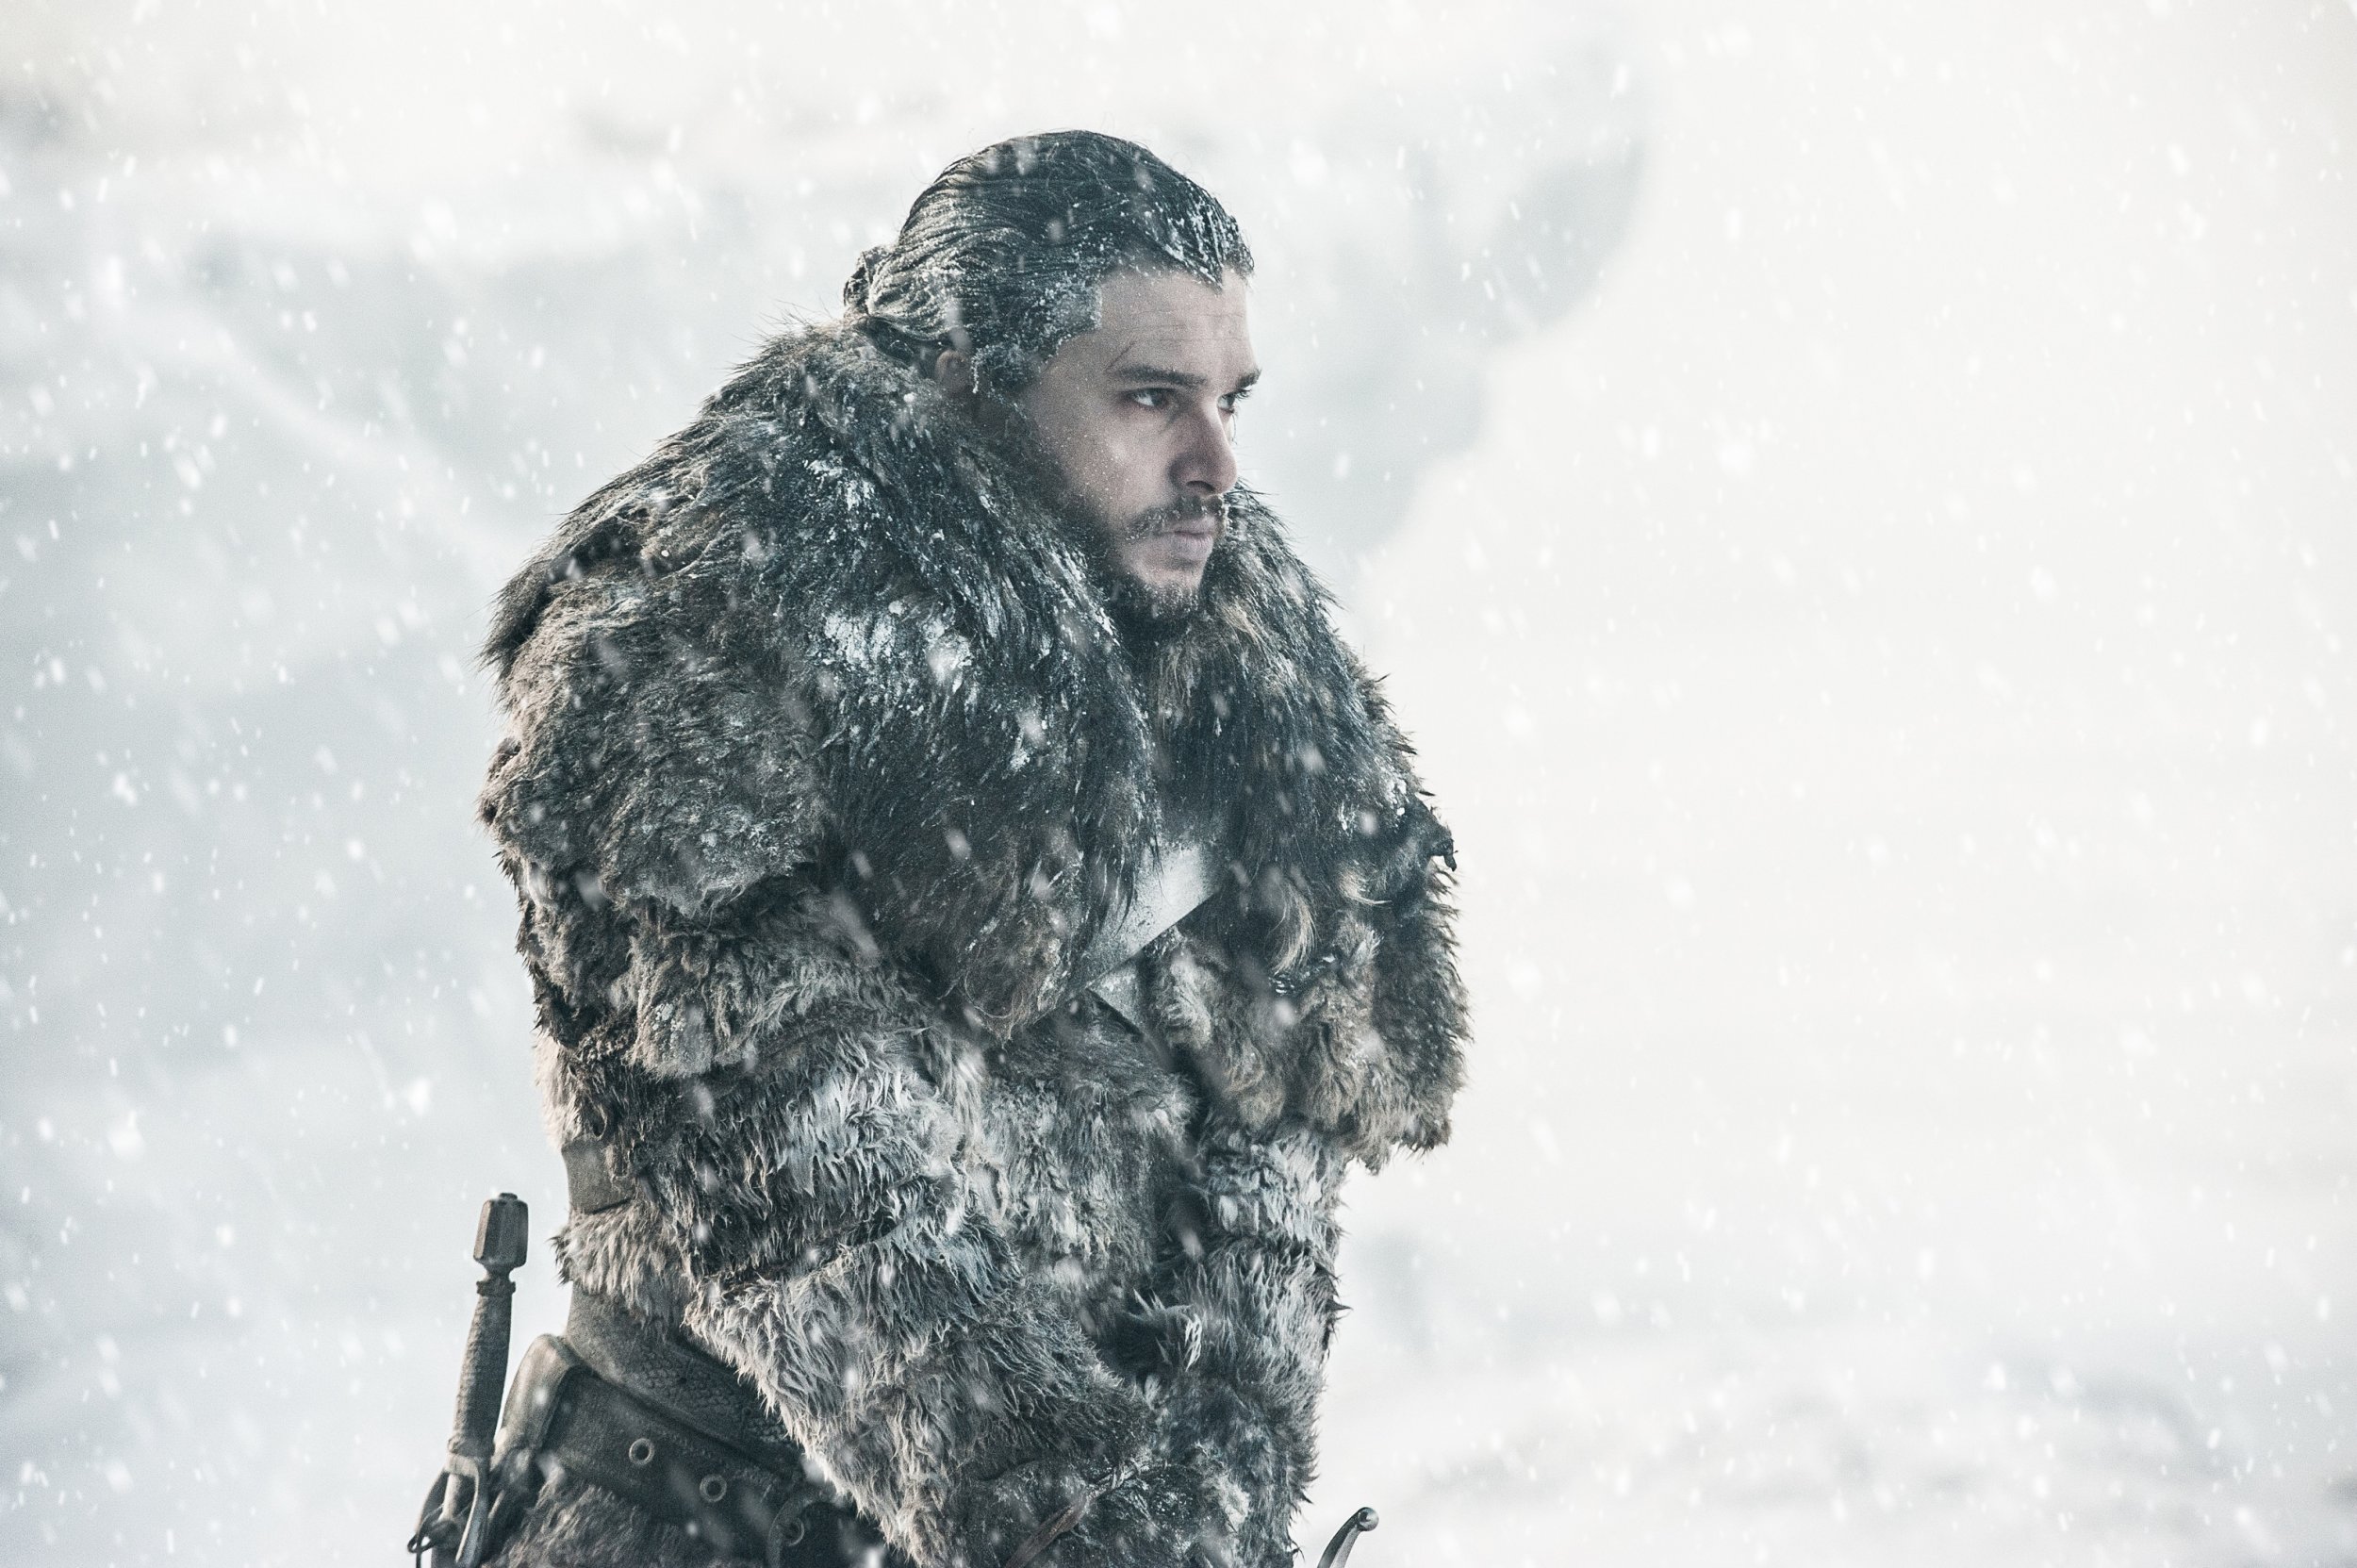 game of thrones beyond the wall removed from google play